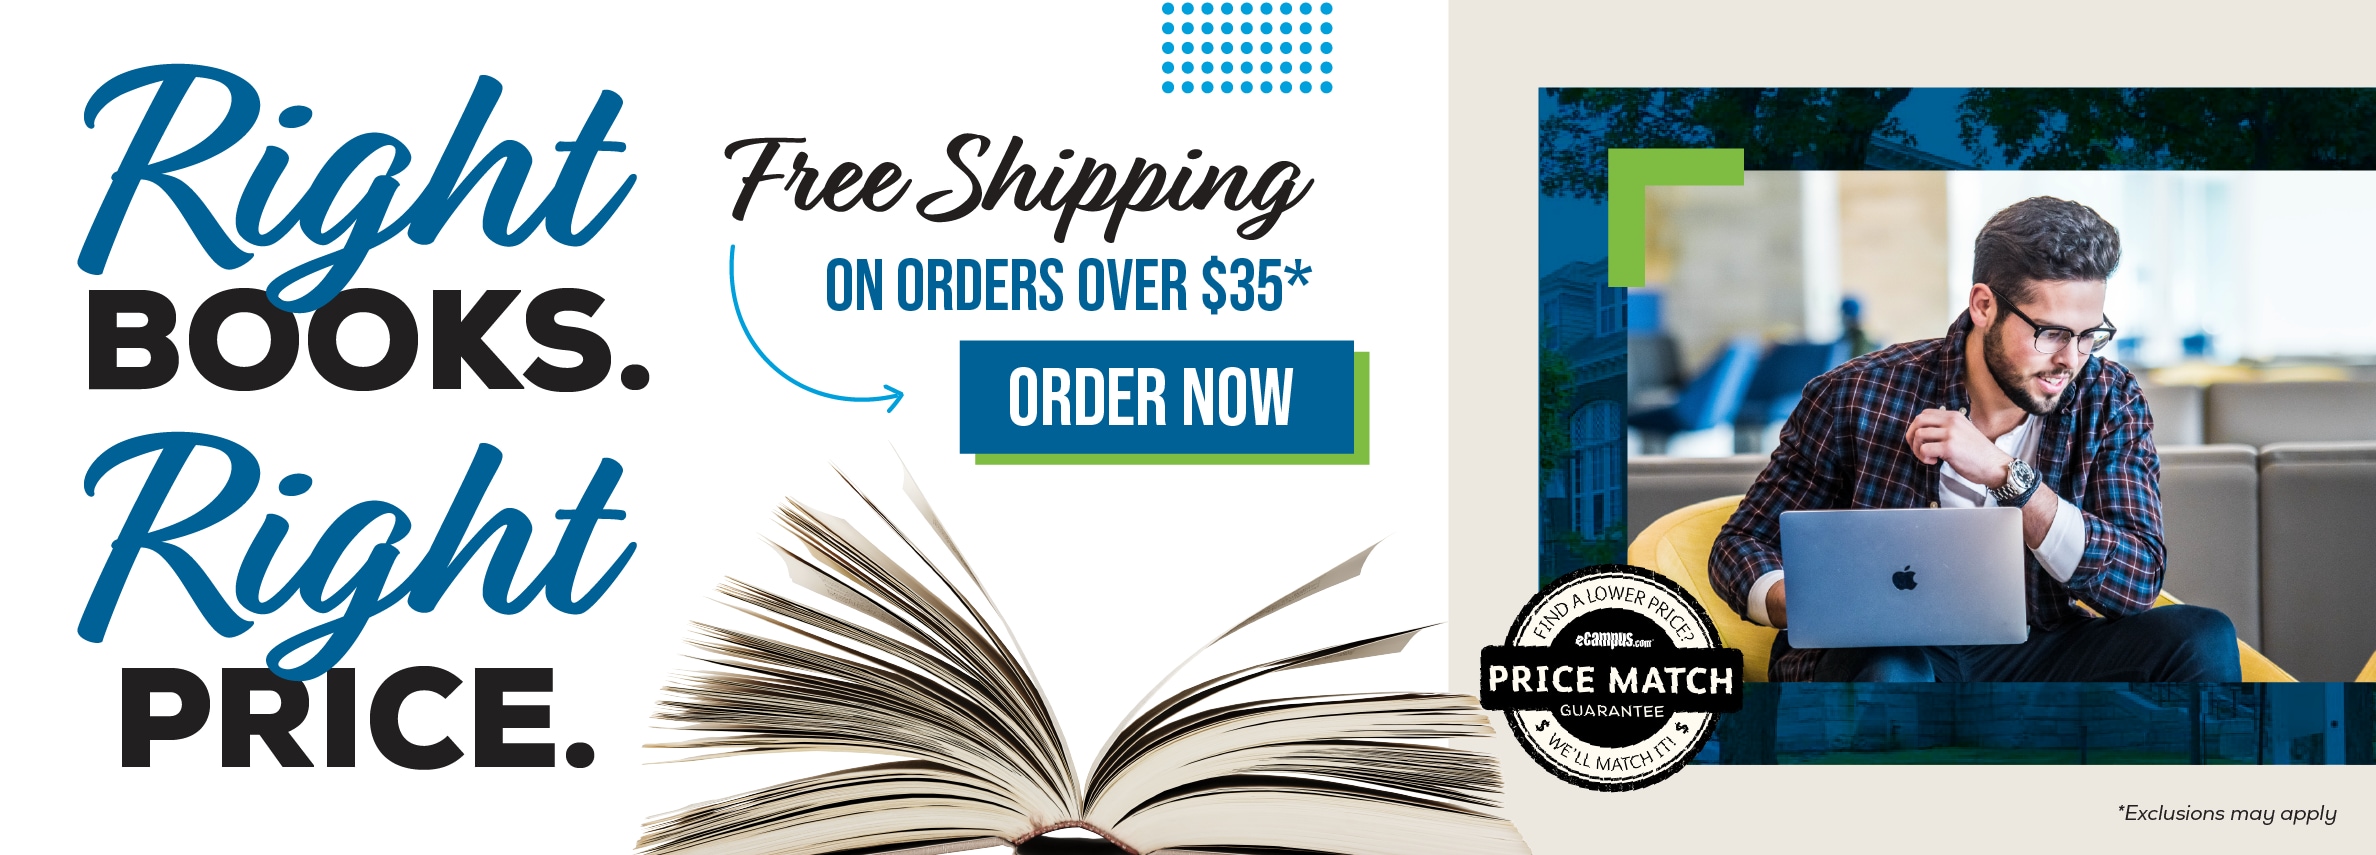 Right books. Right price. Free shipping on orders over $35.* Order now. Price Match Guarantee. *Exclusions may apply.